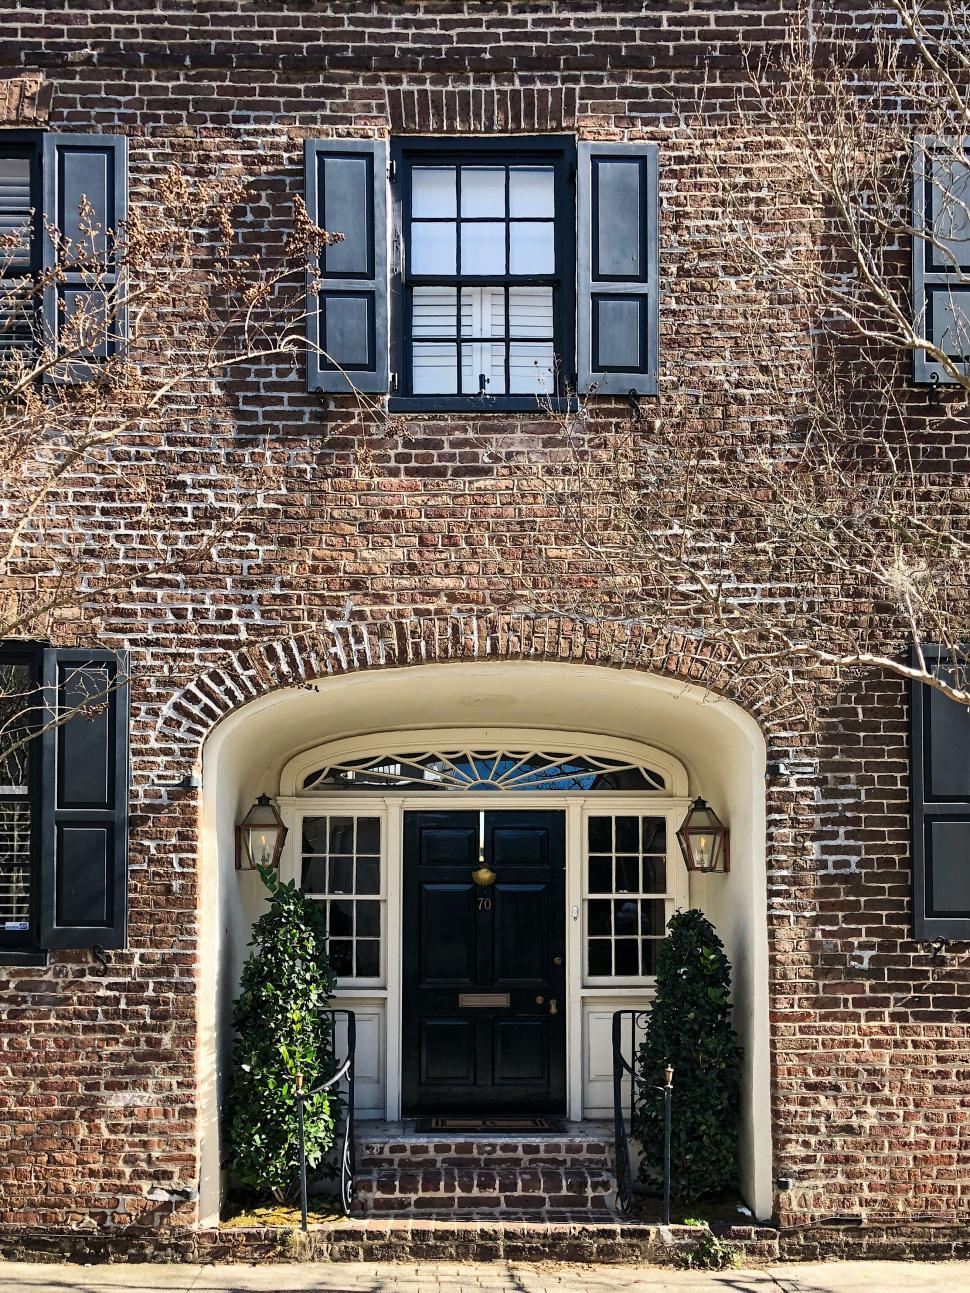 Free Image of Classic brick house front with arched entryway 